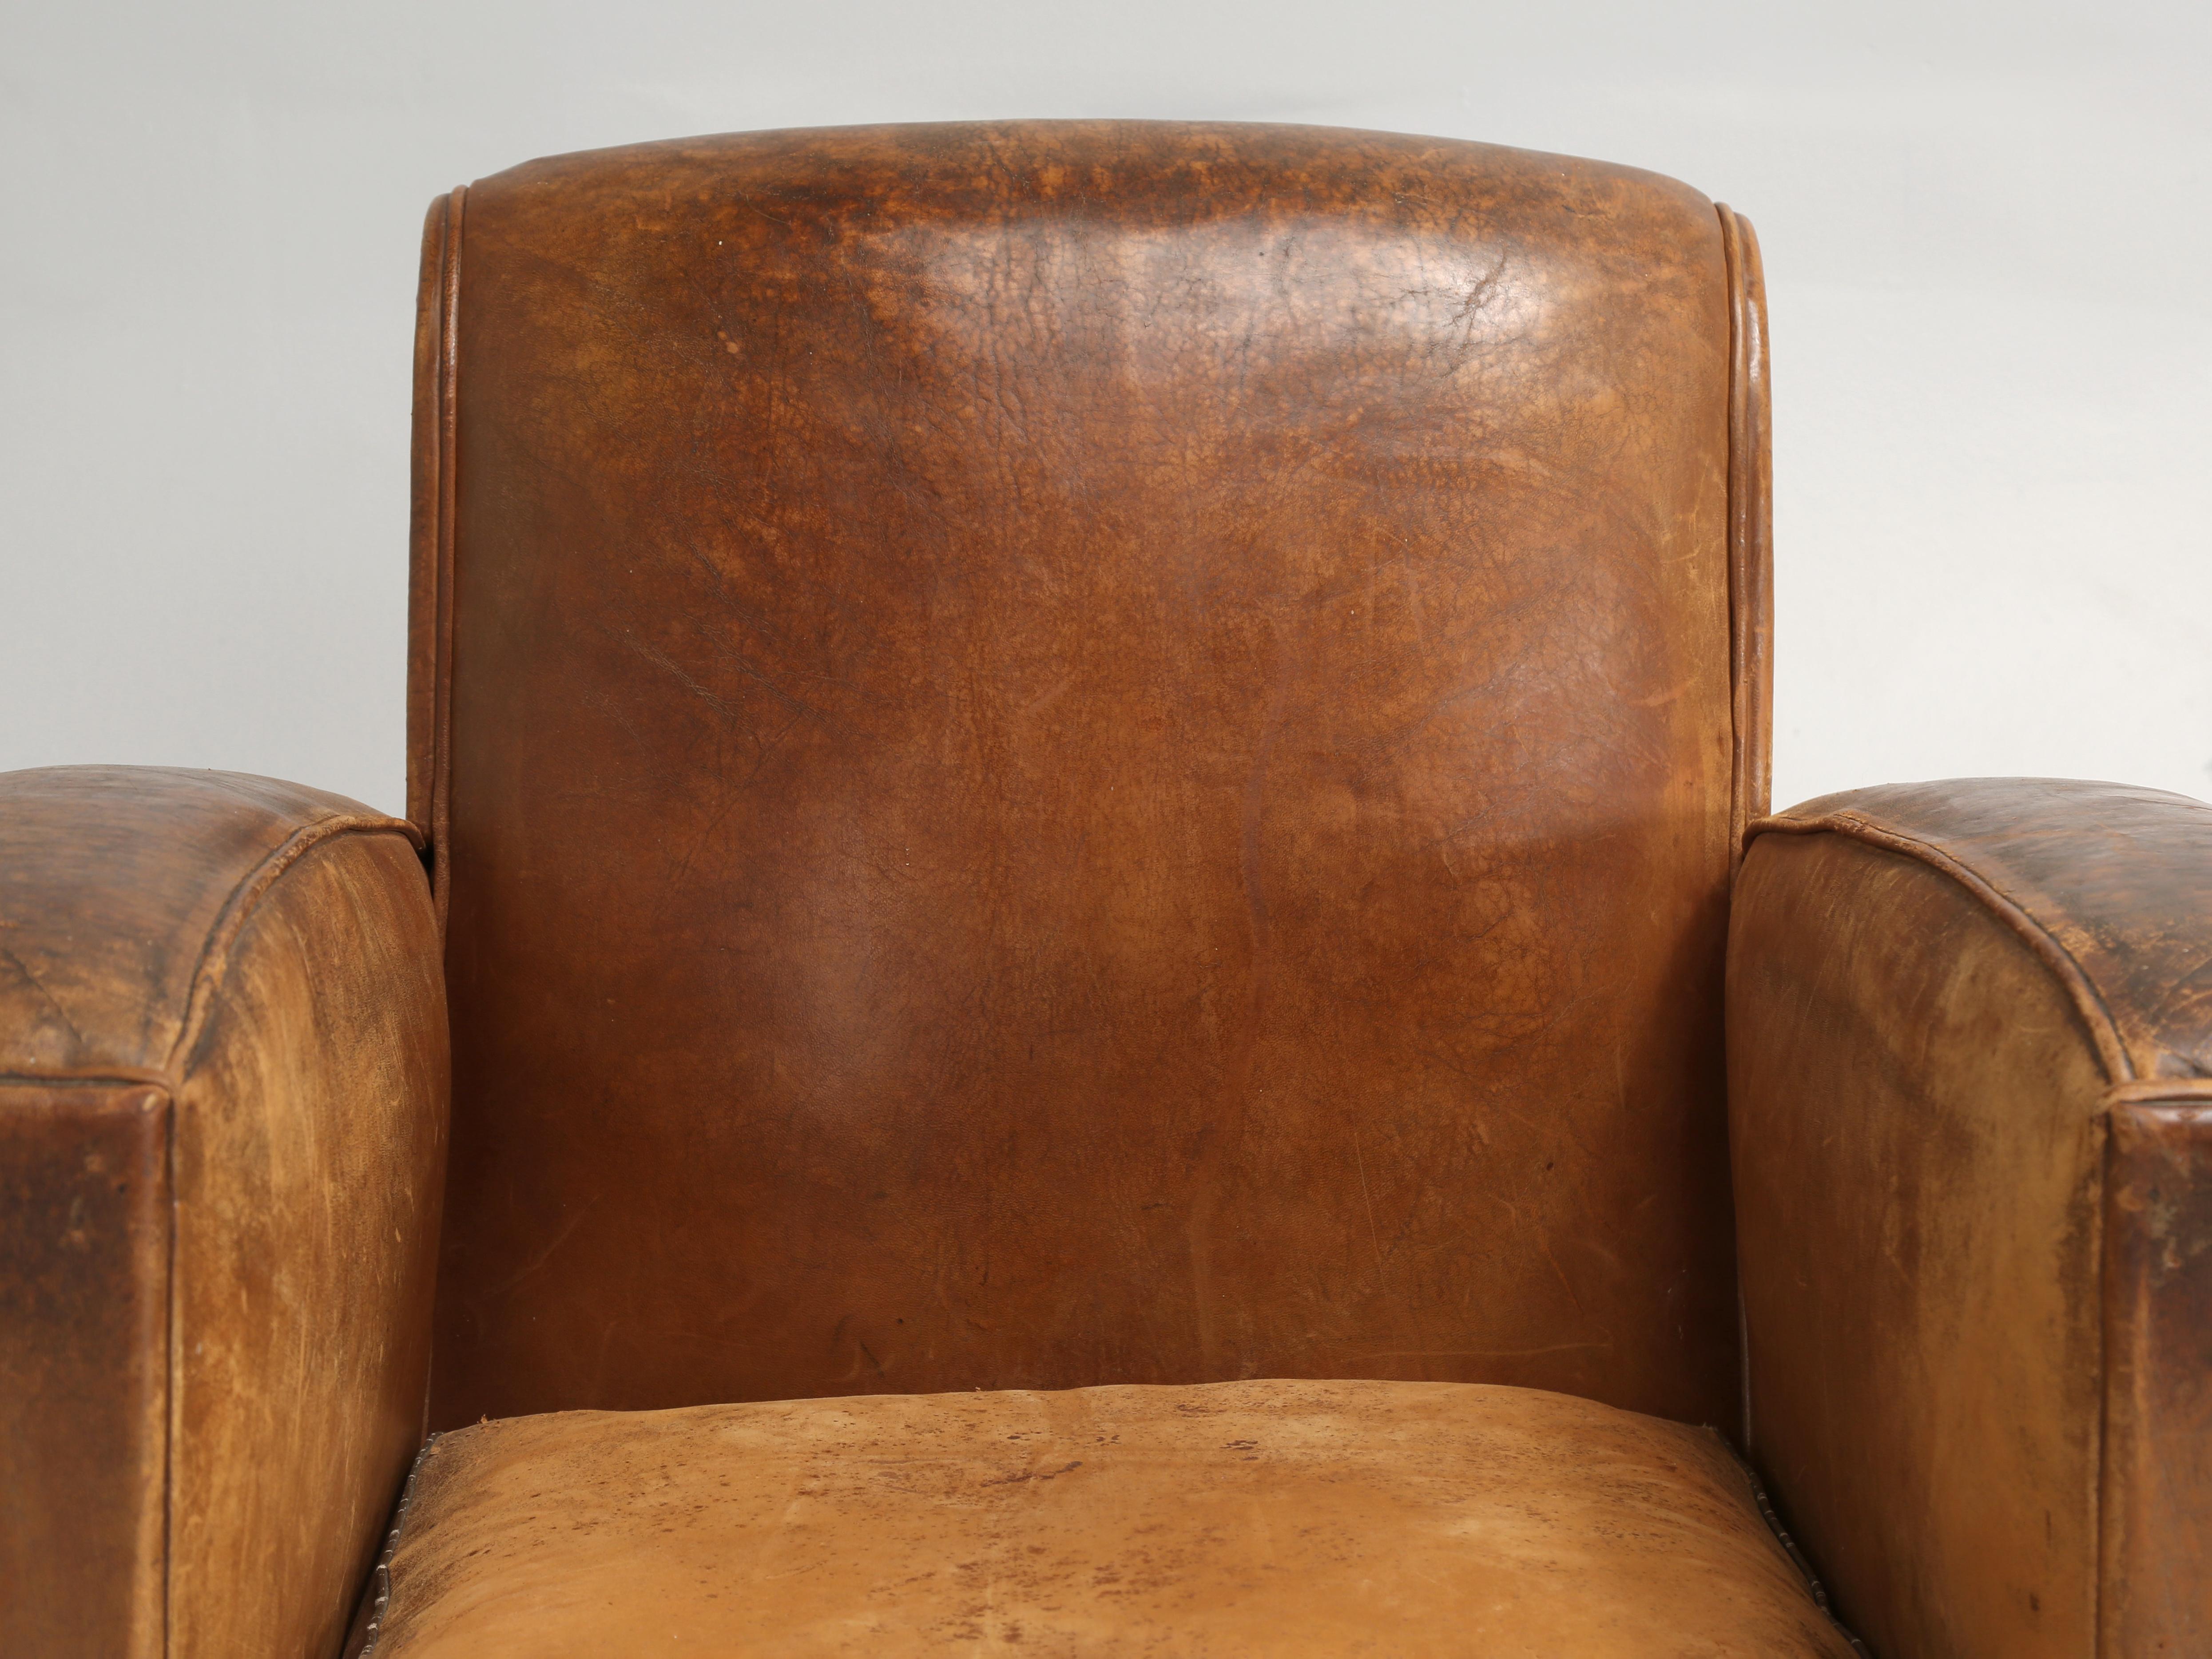 French leather club chairs that are Unrestored Cosmetically, but Completely Restored on the Inside. Extremely Rare Set of (4) Matching All Original French Art Deco Leather Club Chairs, that are still in the Old French Leather. Each of the French